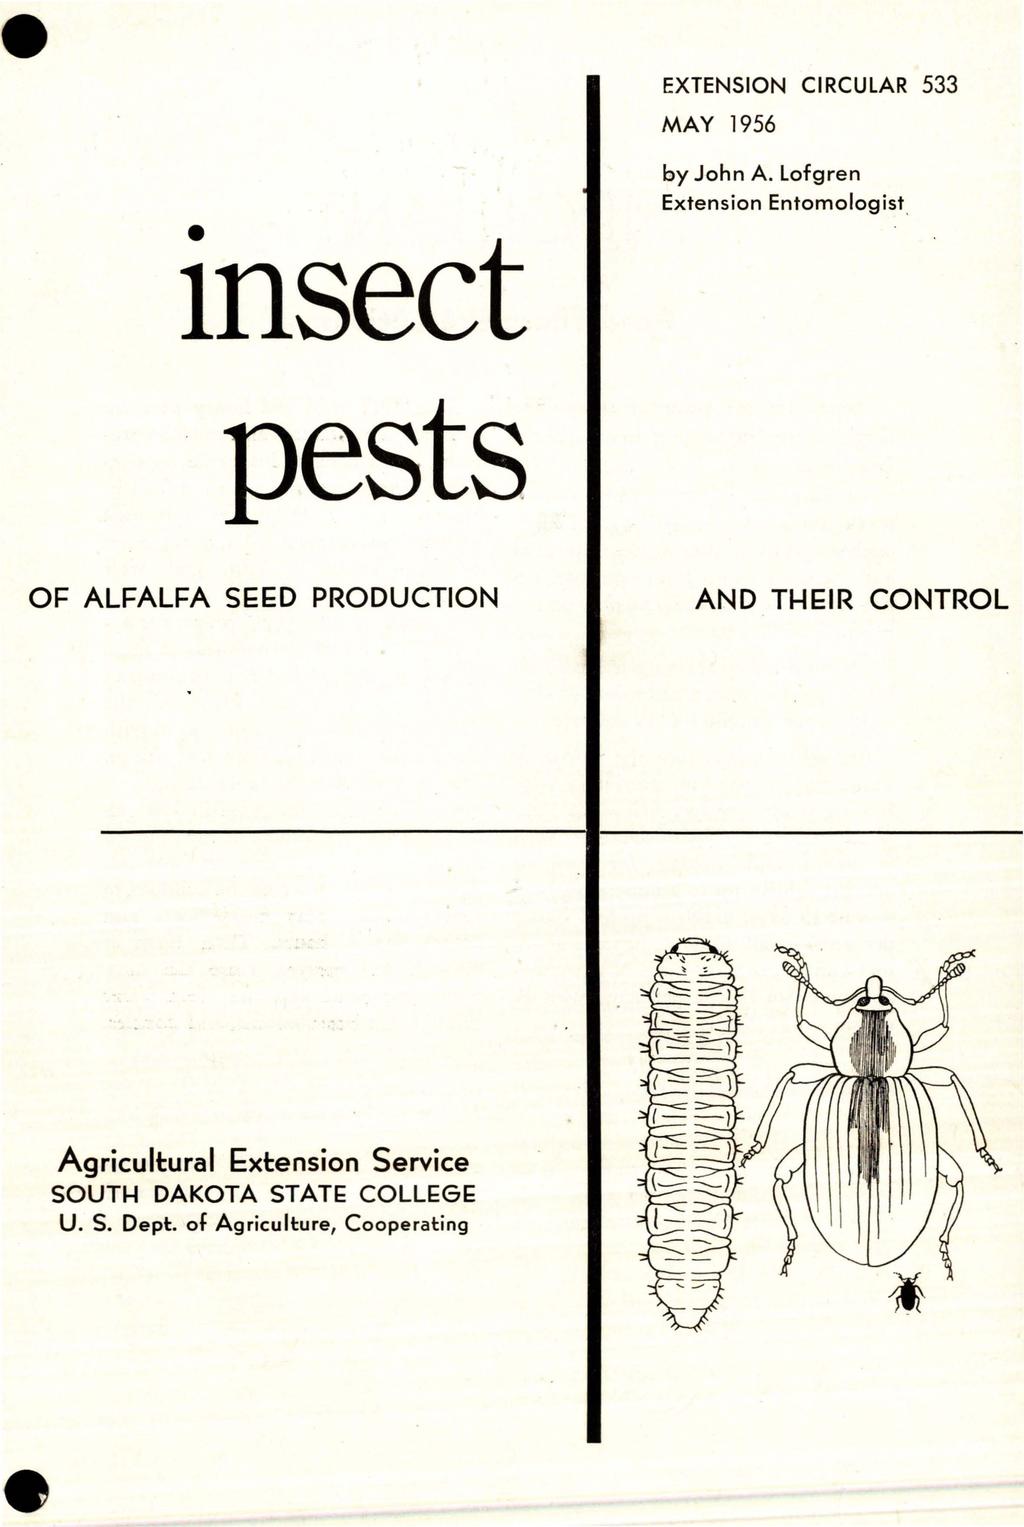 EXTENSION CIRCULAR 533 MAY 1956 insect pests by John A.